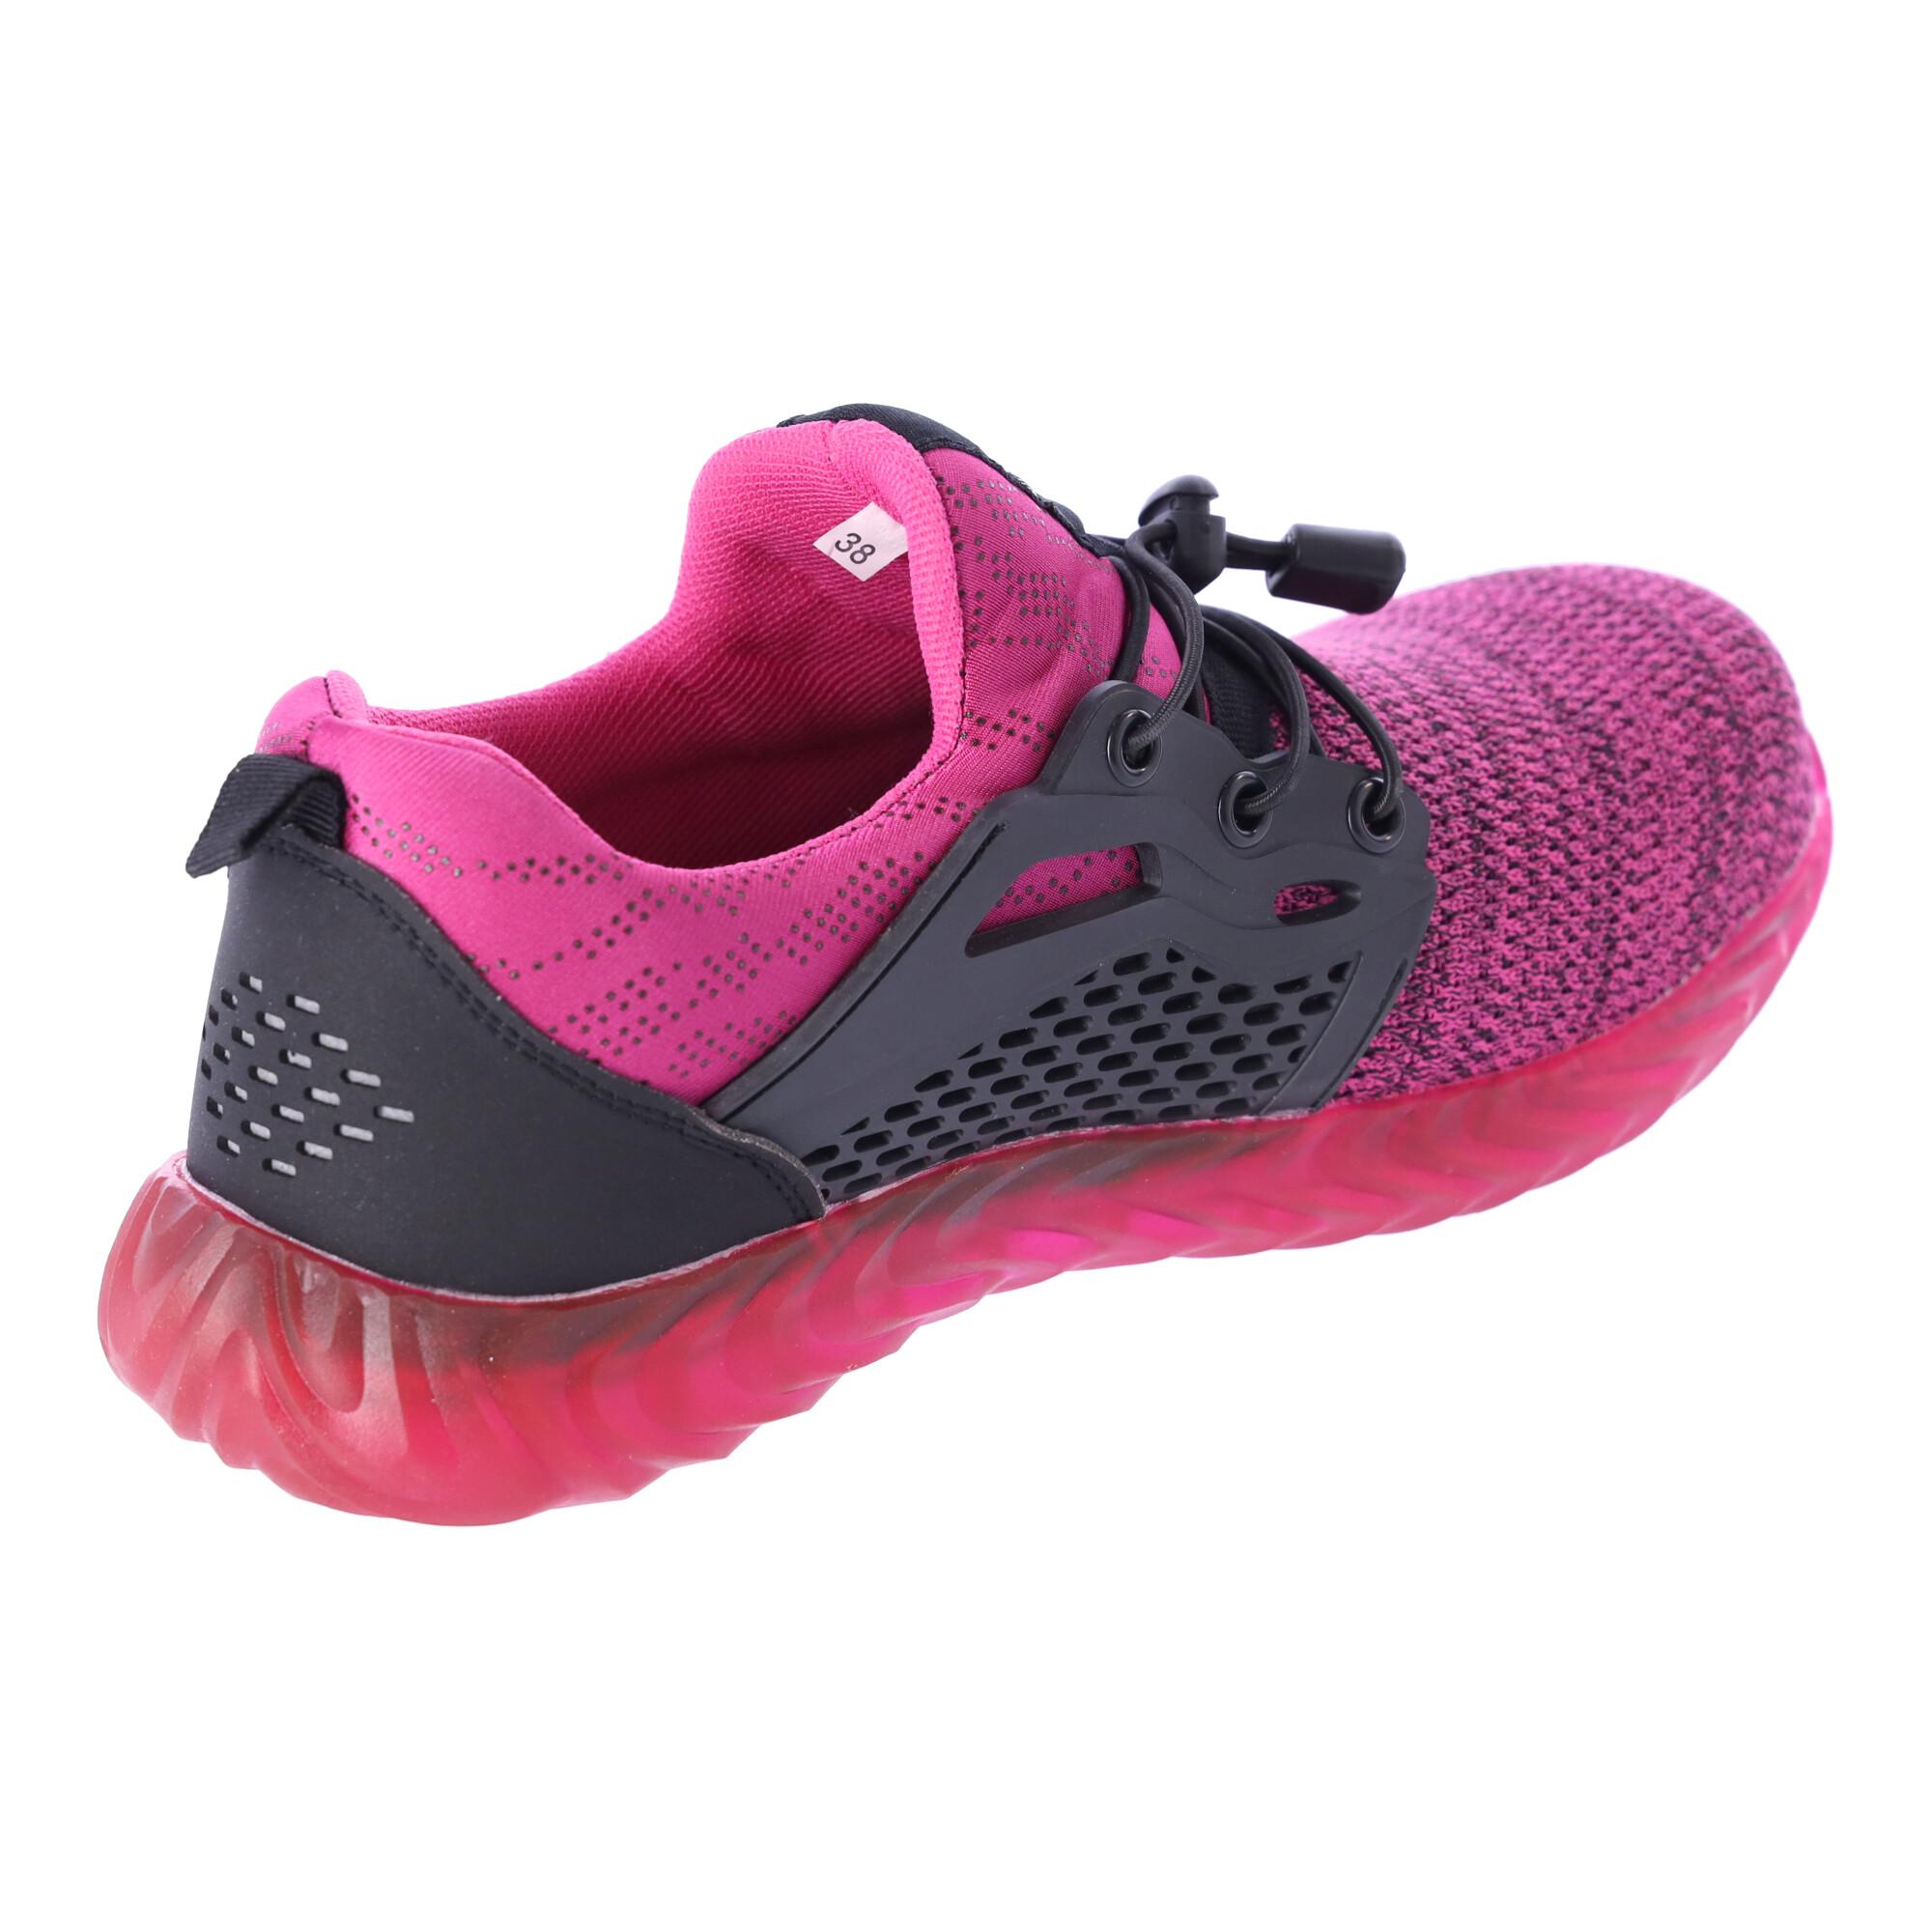 Work safety shoes "37" - pink